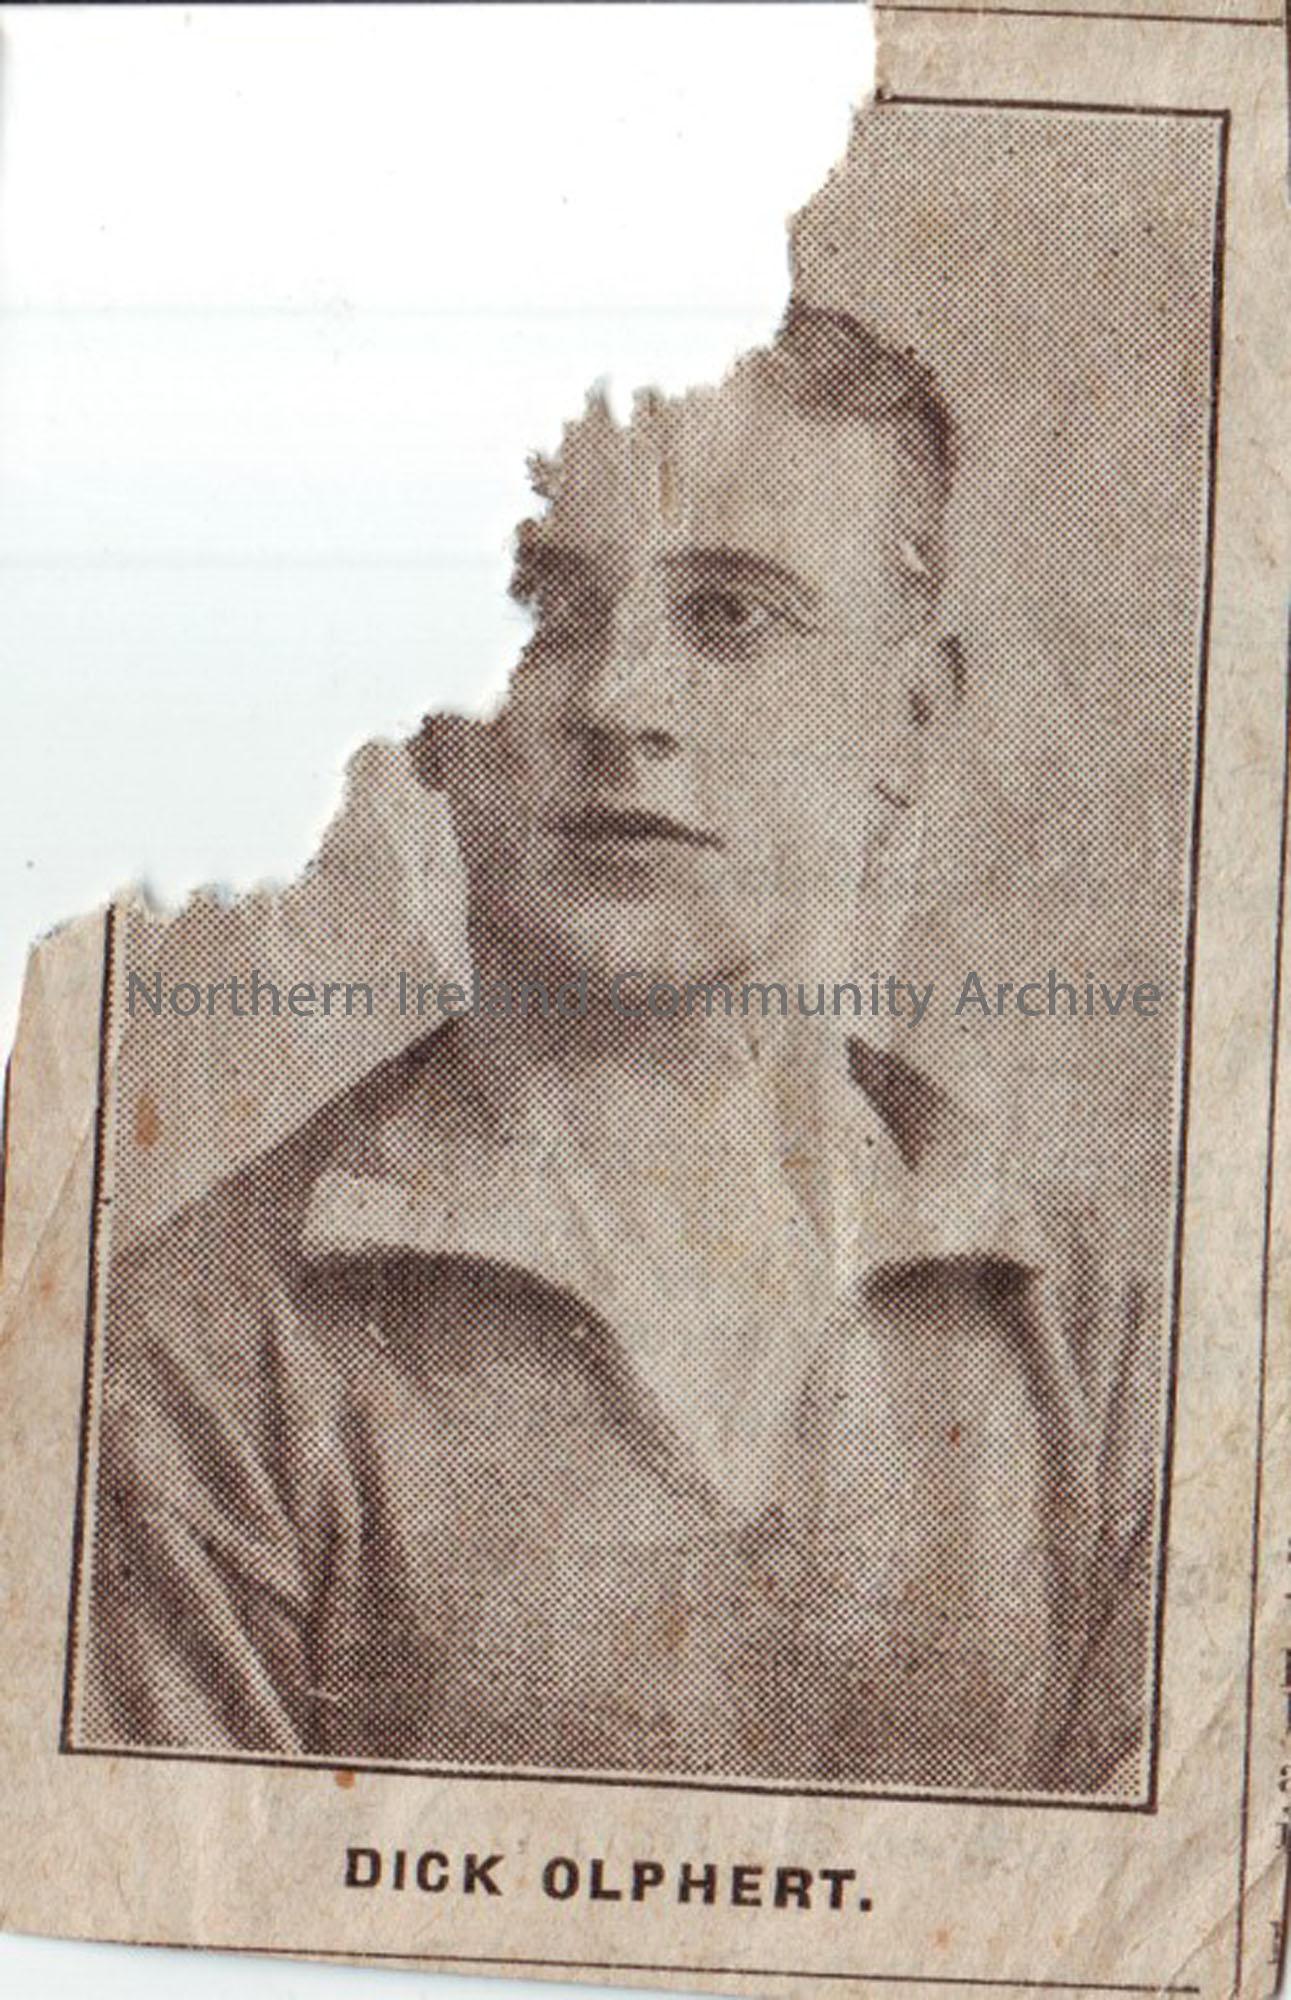 Newspaper cuttings relating to obituaries of several Ballymoney residents and a damaged photograph of Dick Olphert